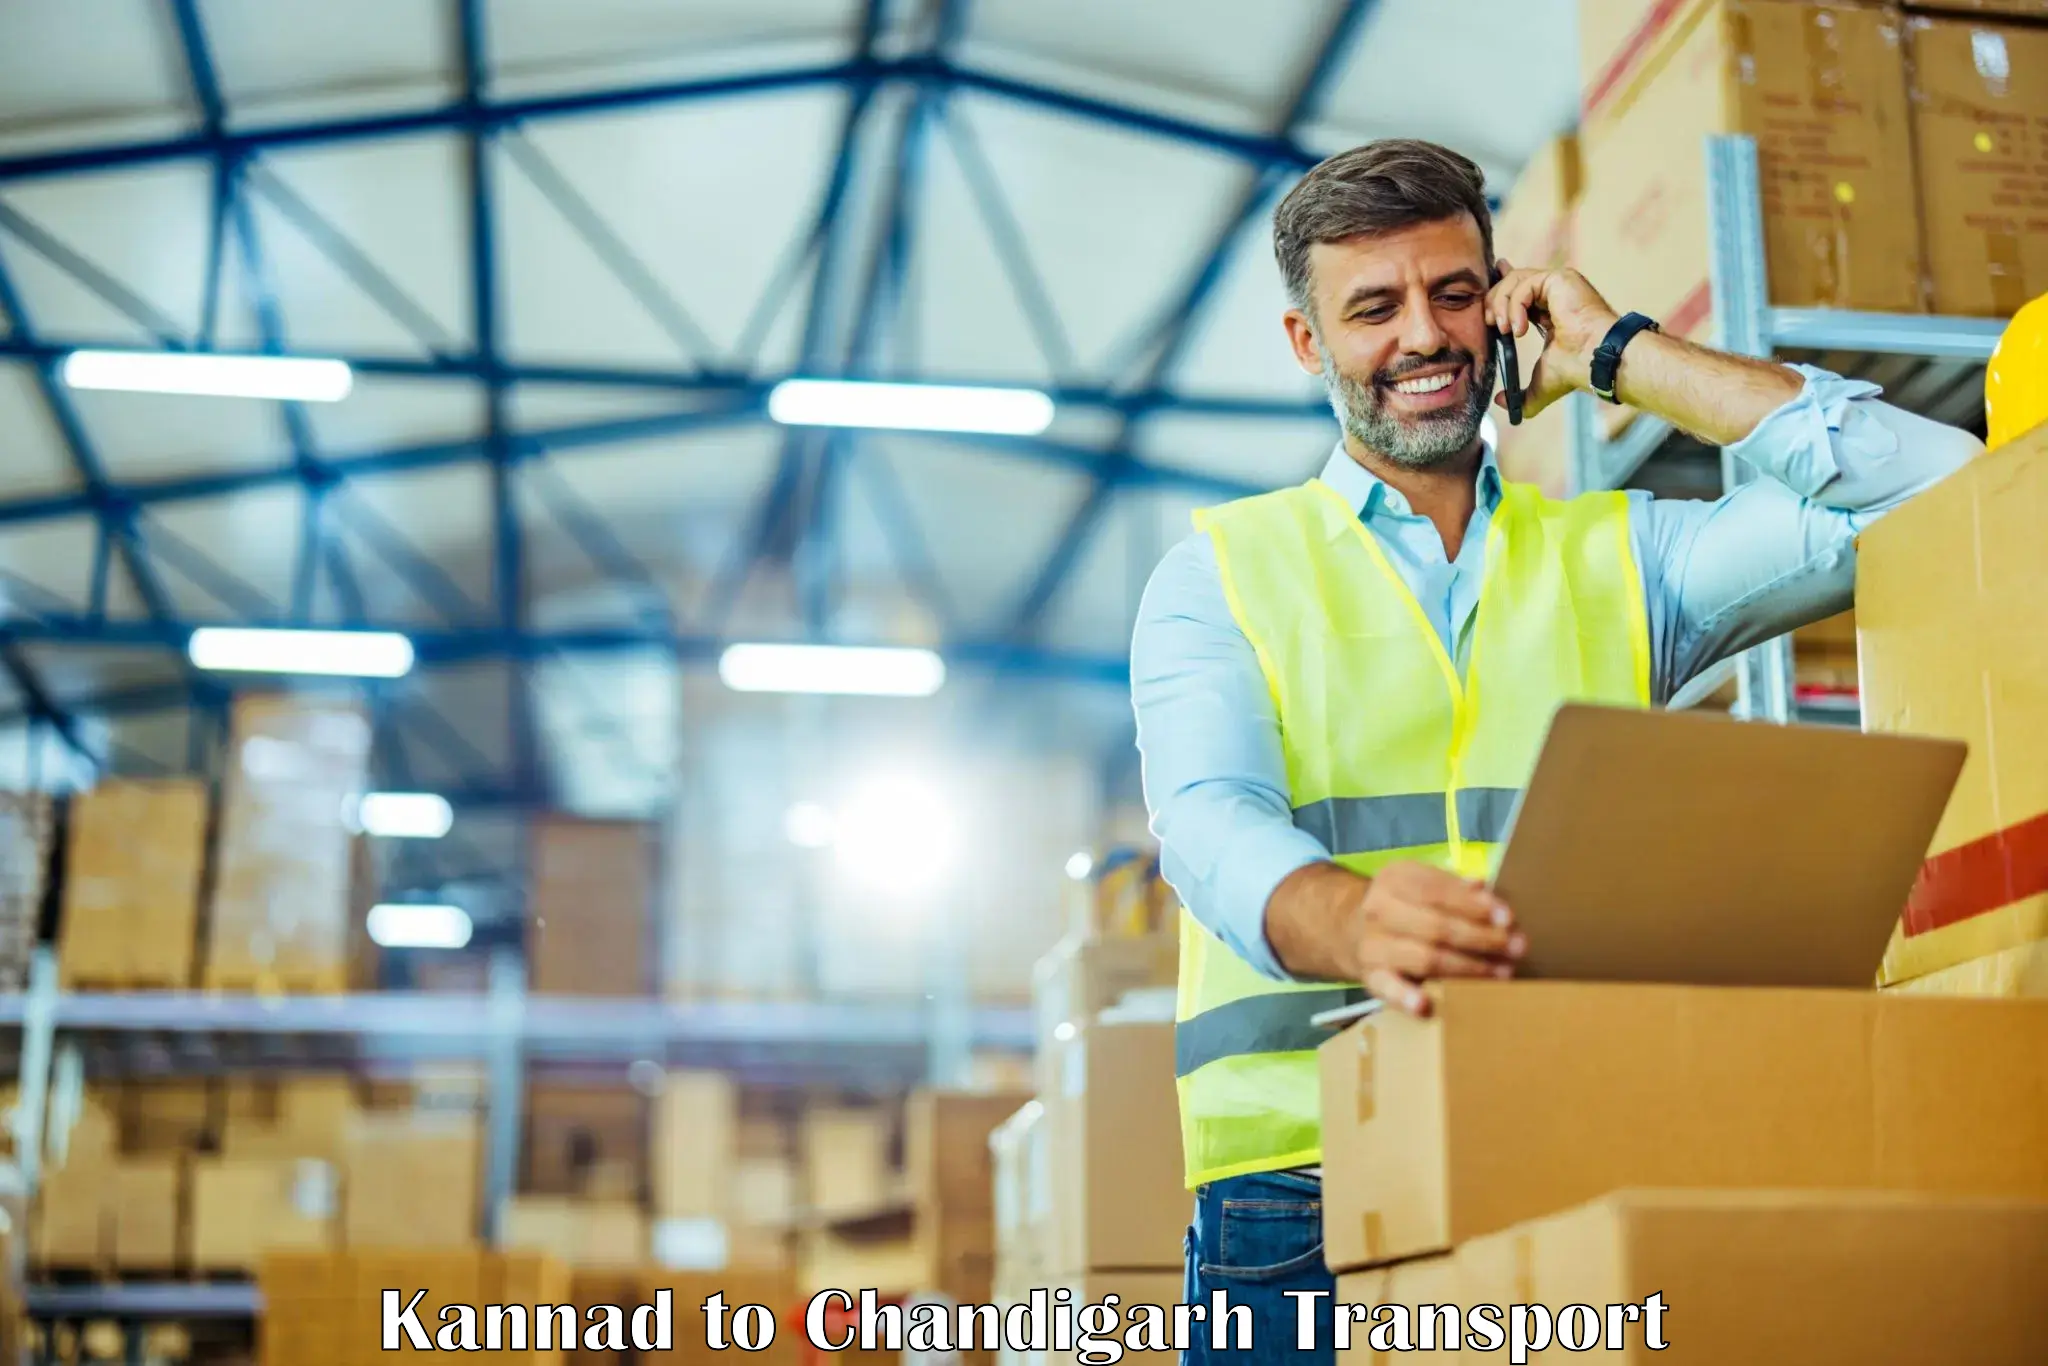 Truck transport companies in India in Kannad to Chandigarh